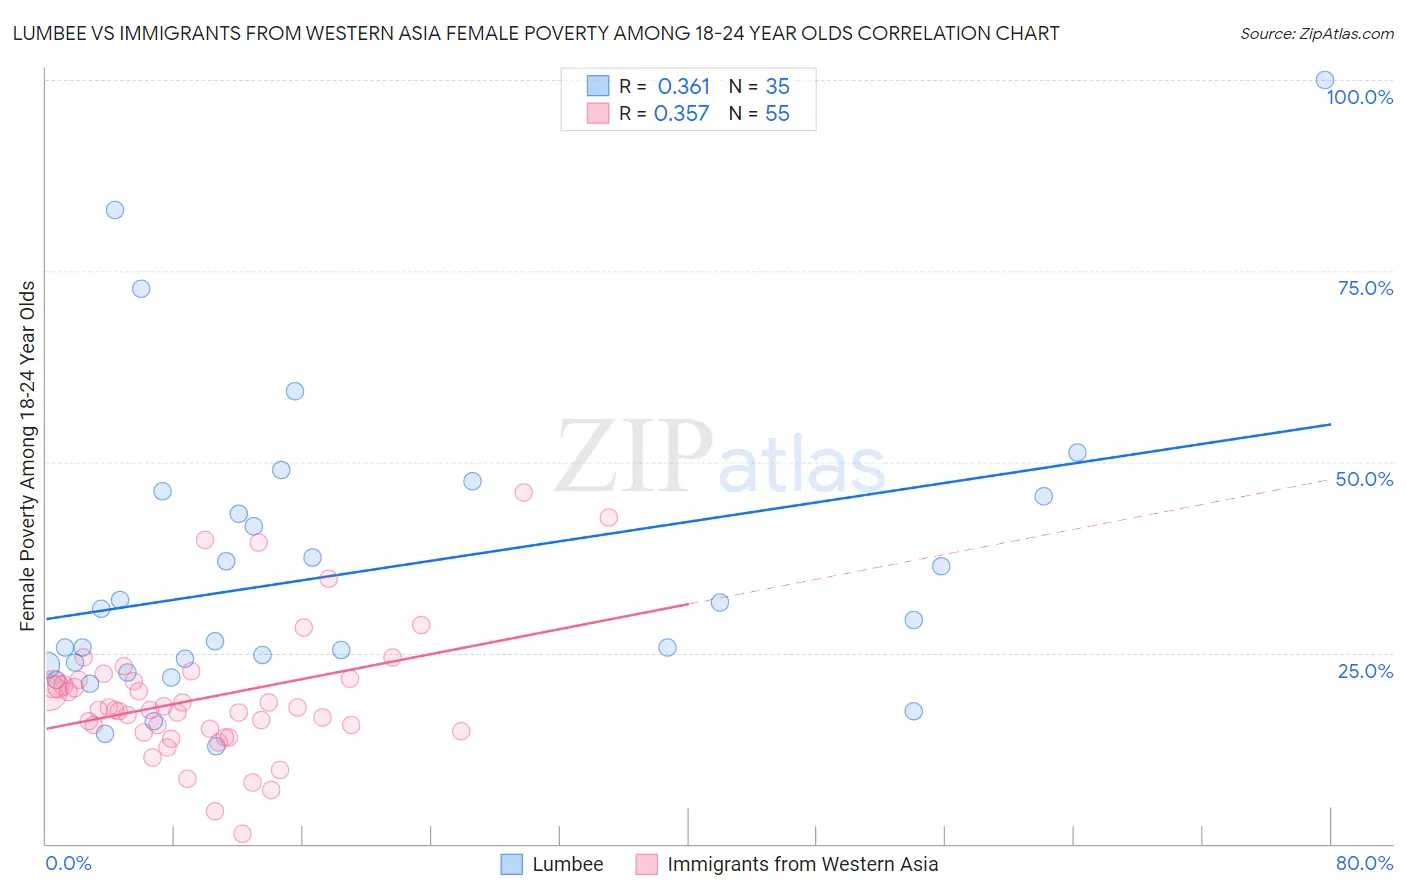 Lumbee vs Immigrants from Western Asia Female Poverty Among 18-24 Year Olds